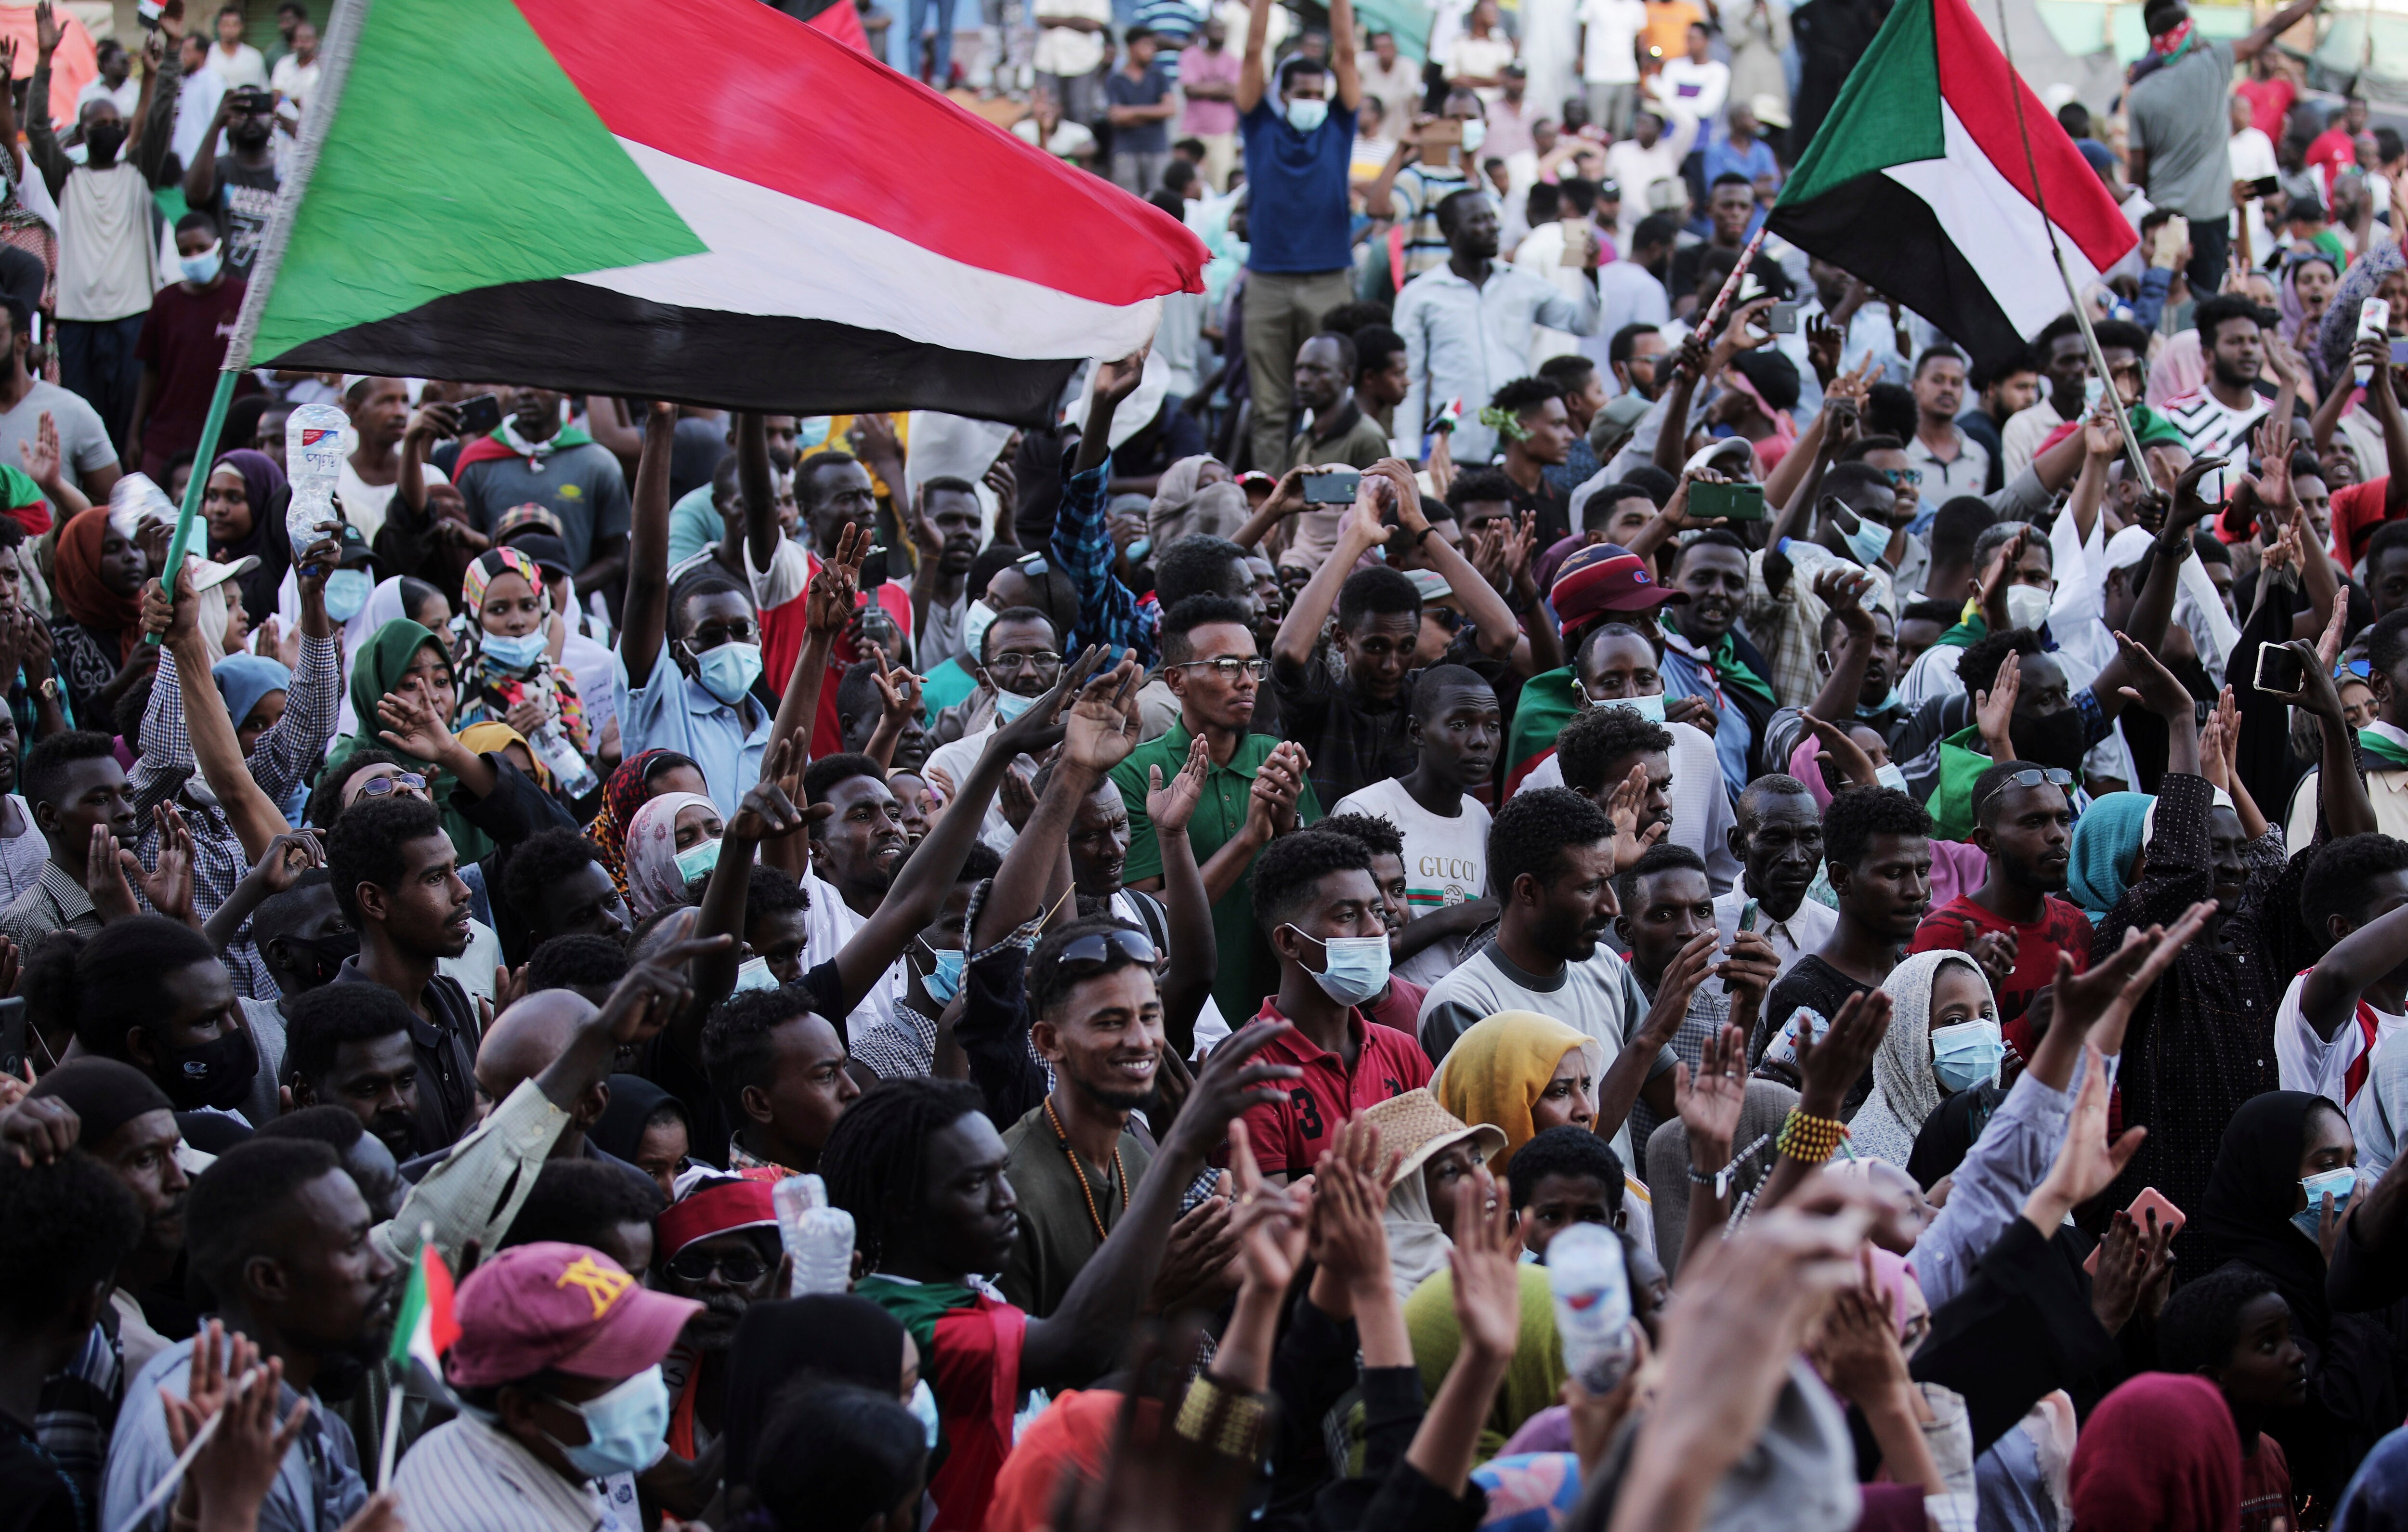 People chant slogans during a protest in Khartoum, Sudan, on Saturday, 30 October, 2021.